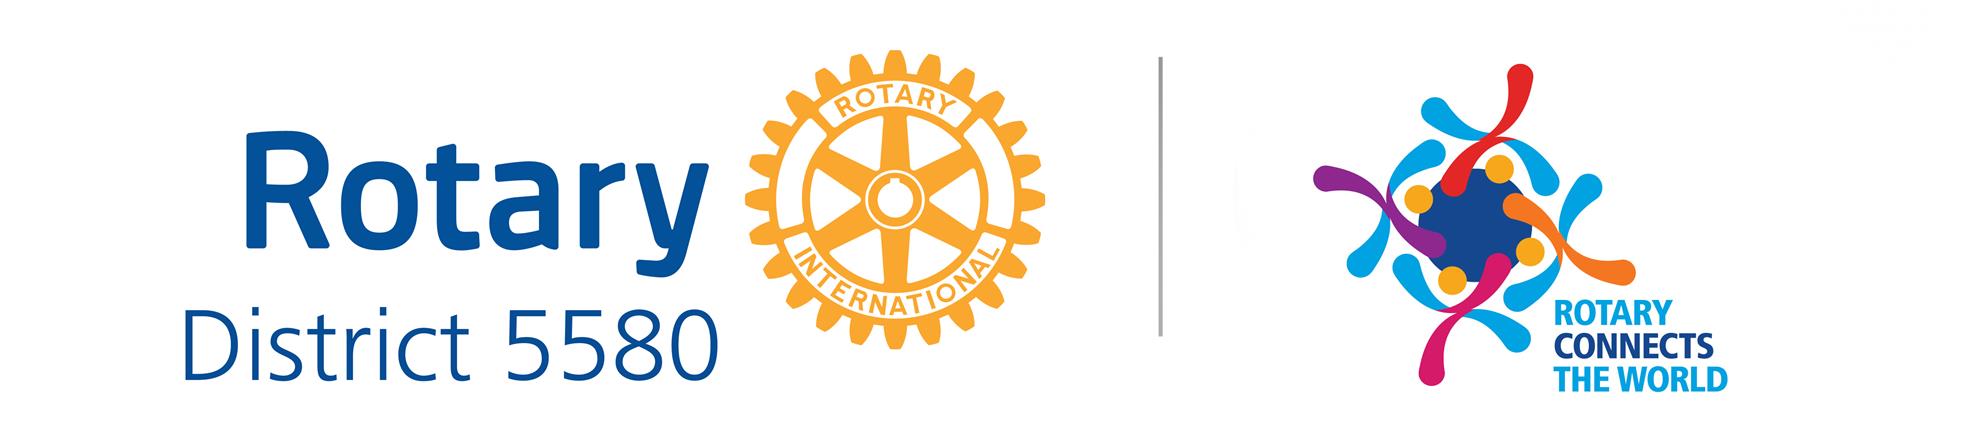 Home Page | Rotary District 5580